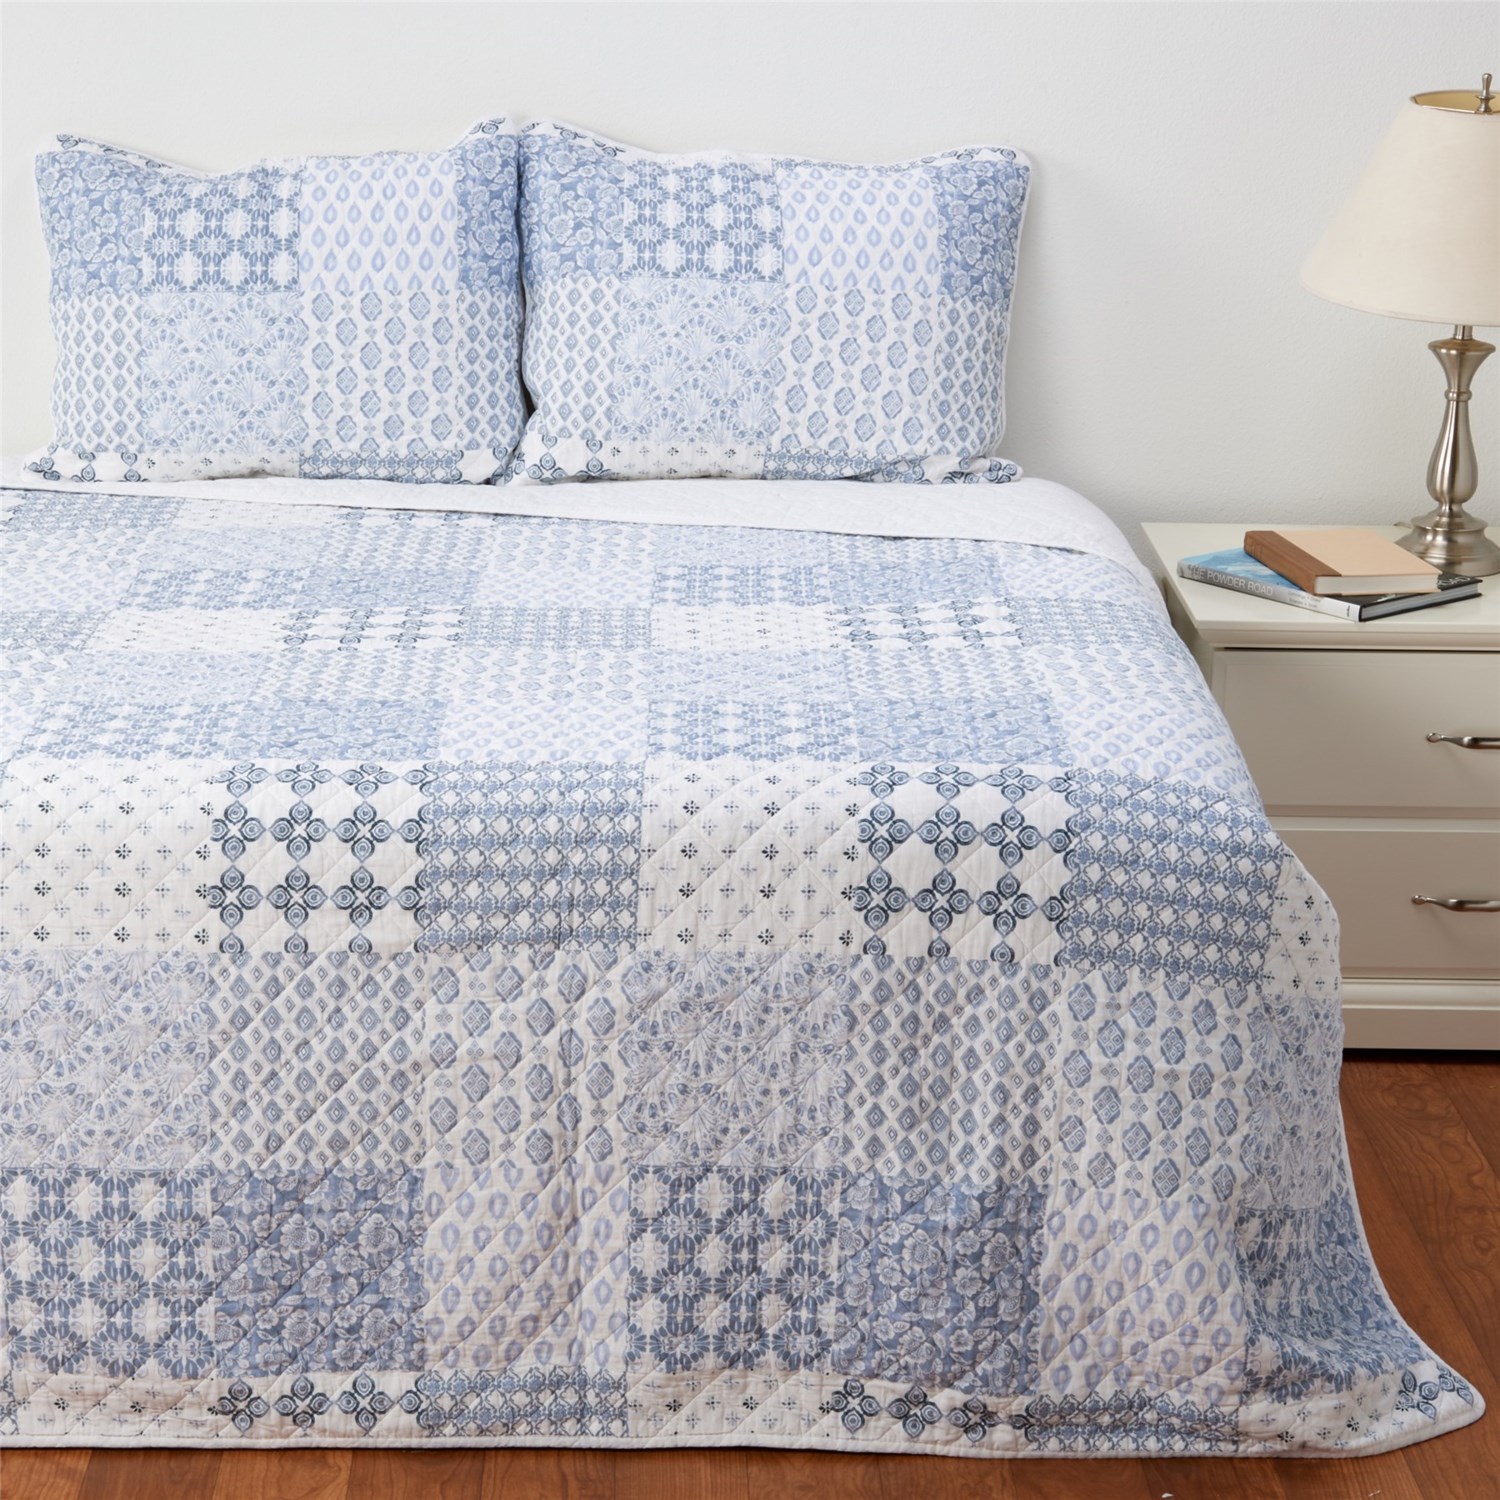 Cloth & Canopy Patchwork Mix Tile Quilt Set - Full/Queen, Blue Ivory ...